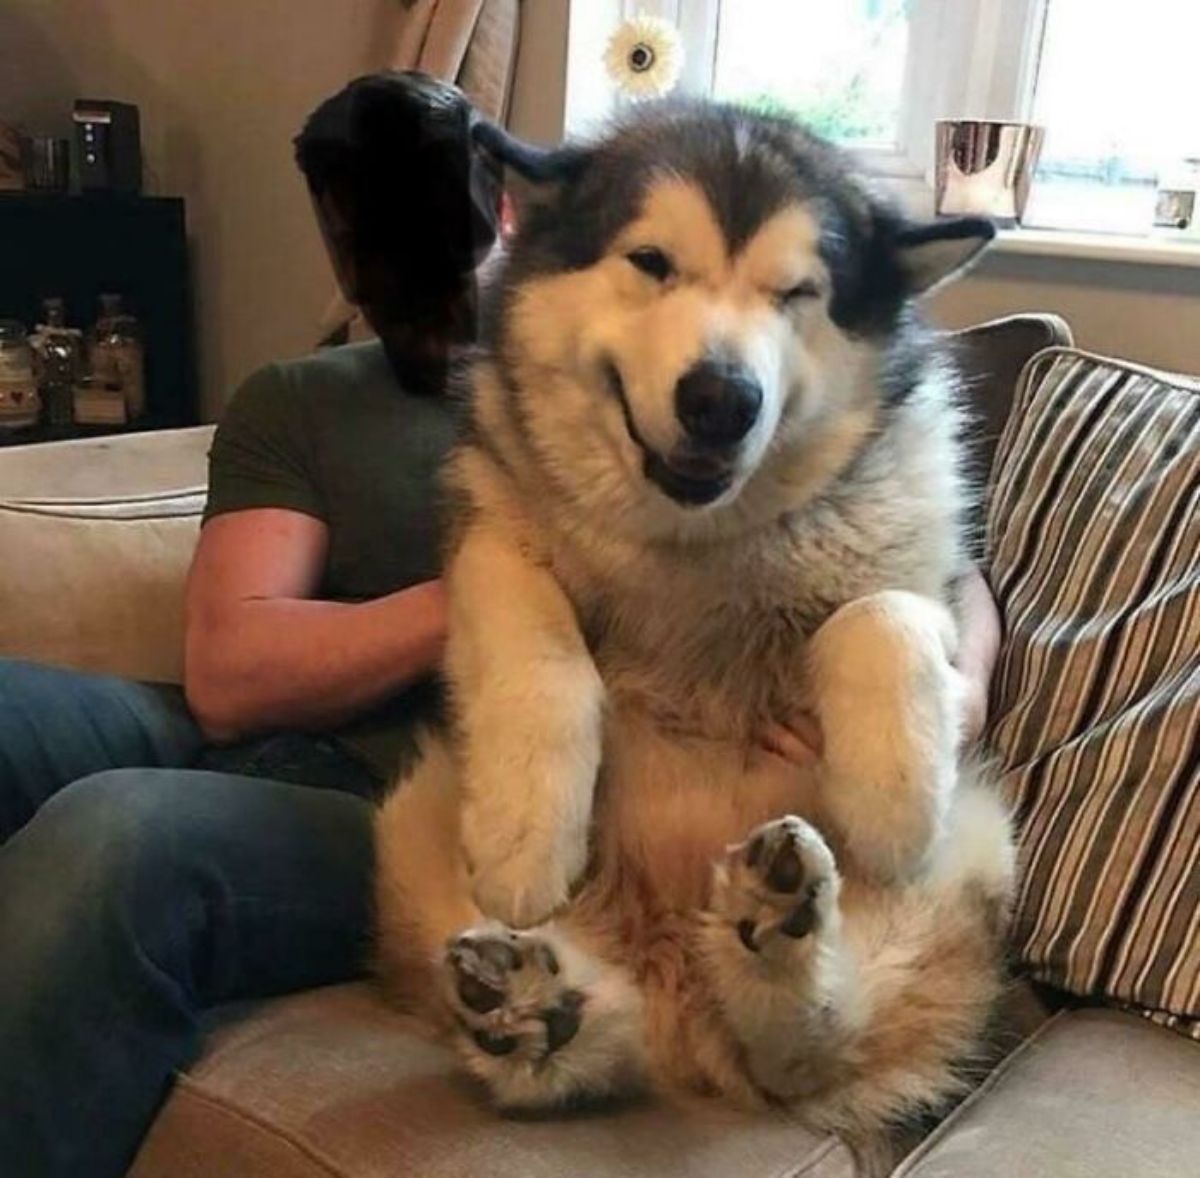 alaskan malamute sitting on a brown couch with a man and getting cuddled